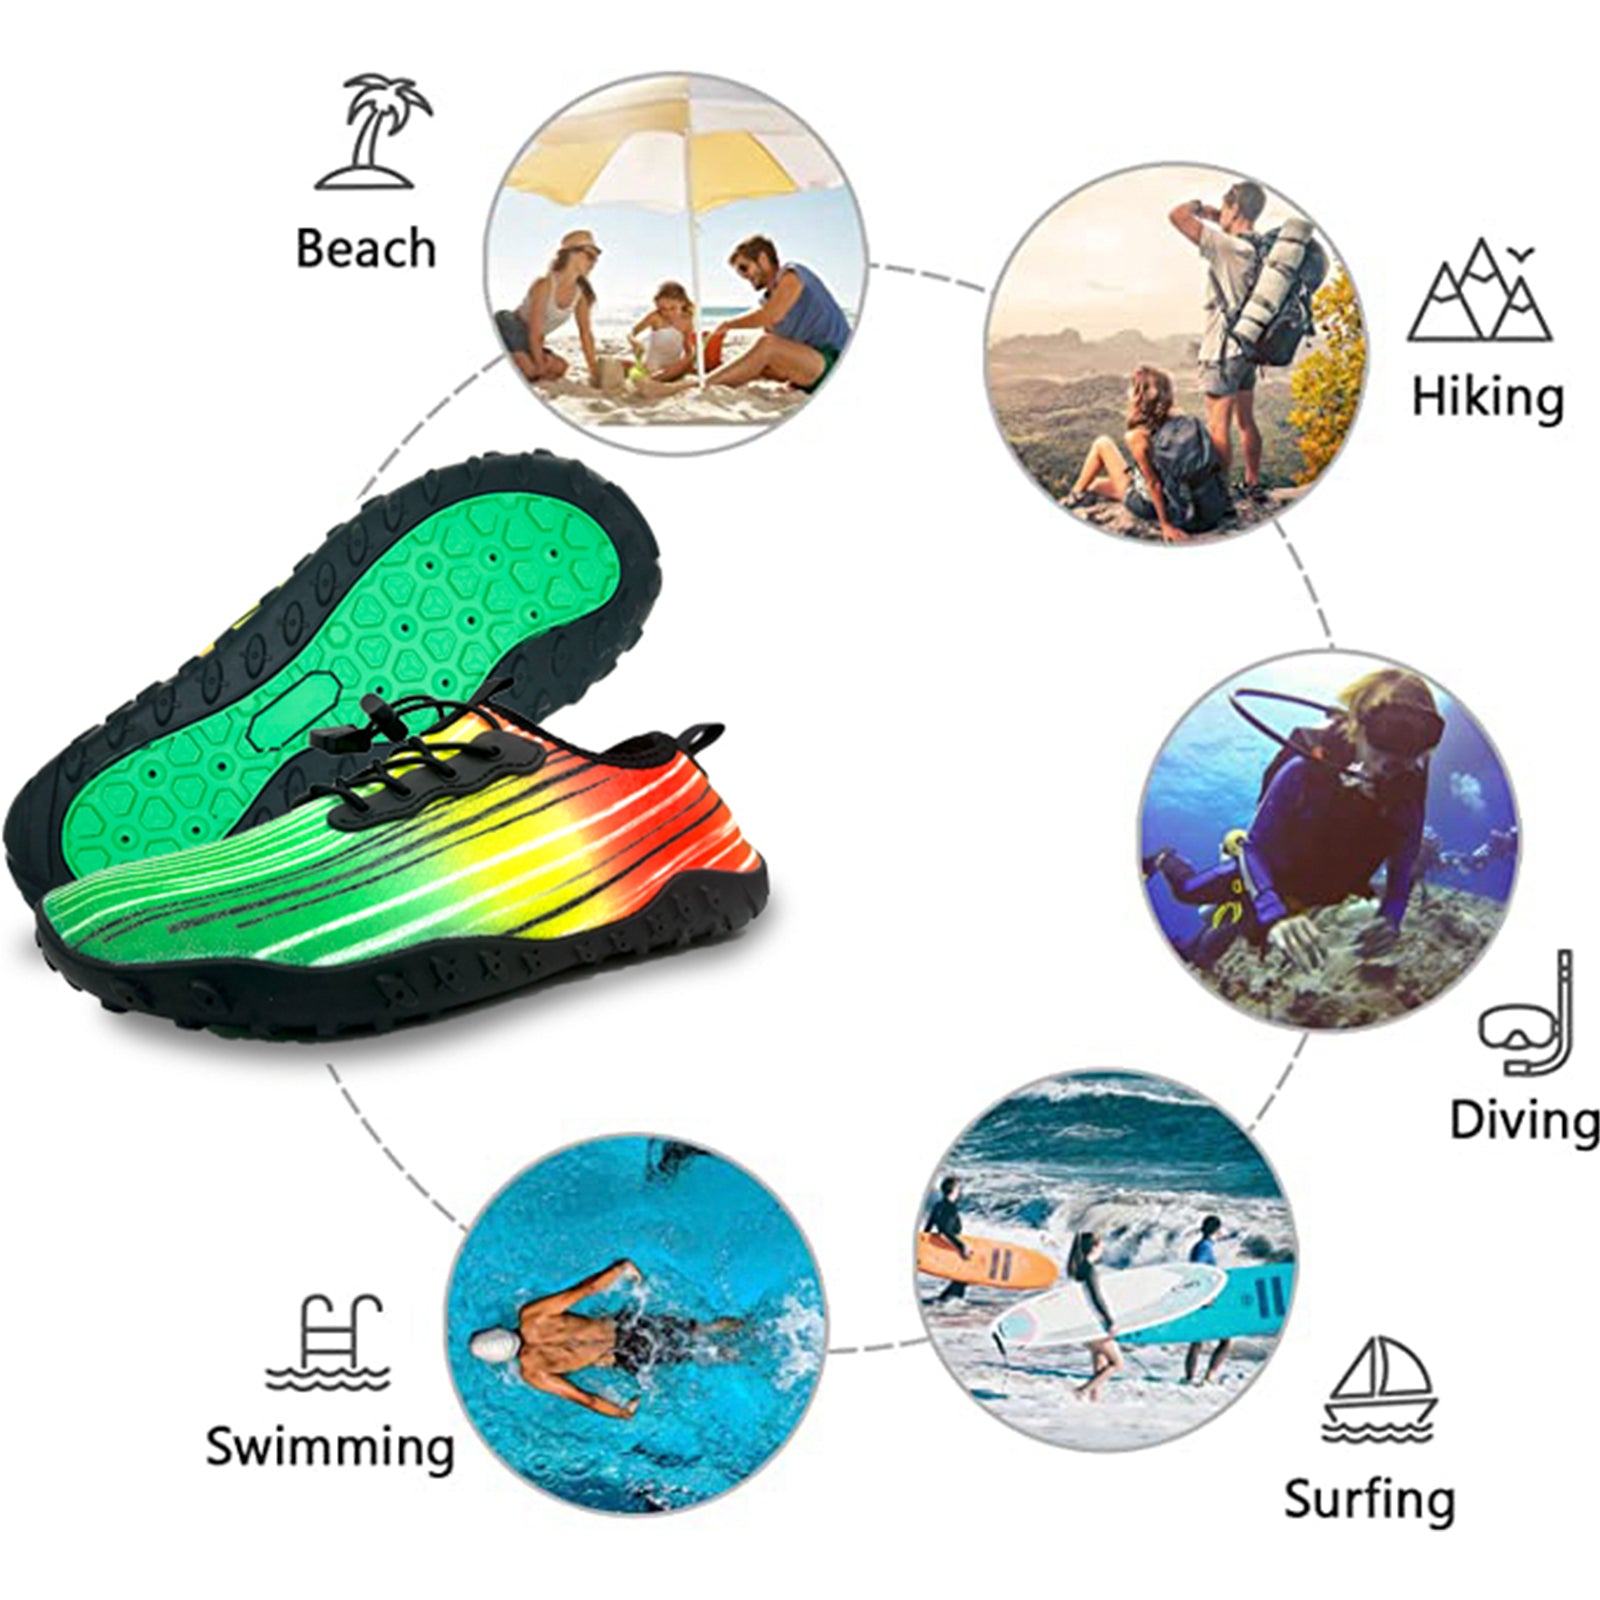 Water Shoes for Men and Women Soft Breathable Slip-on Aqua Shoes Aqua Socks for Swim Beach Pool Surf Yoga (Green Size US 9) from Deals499 at Deals499